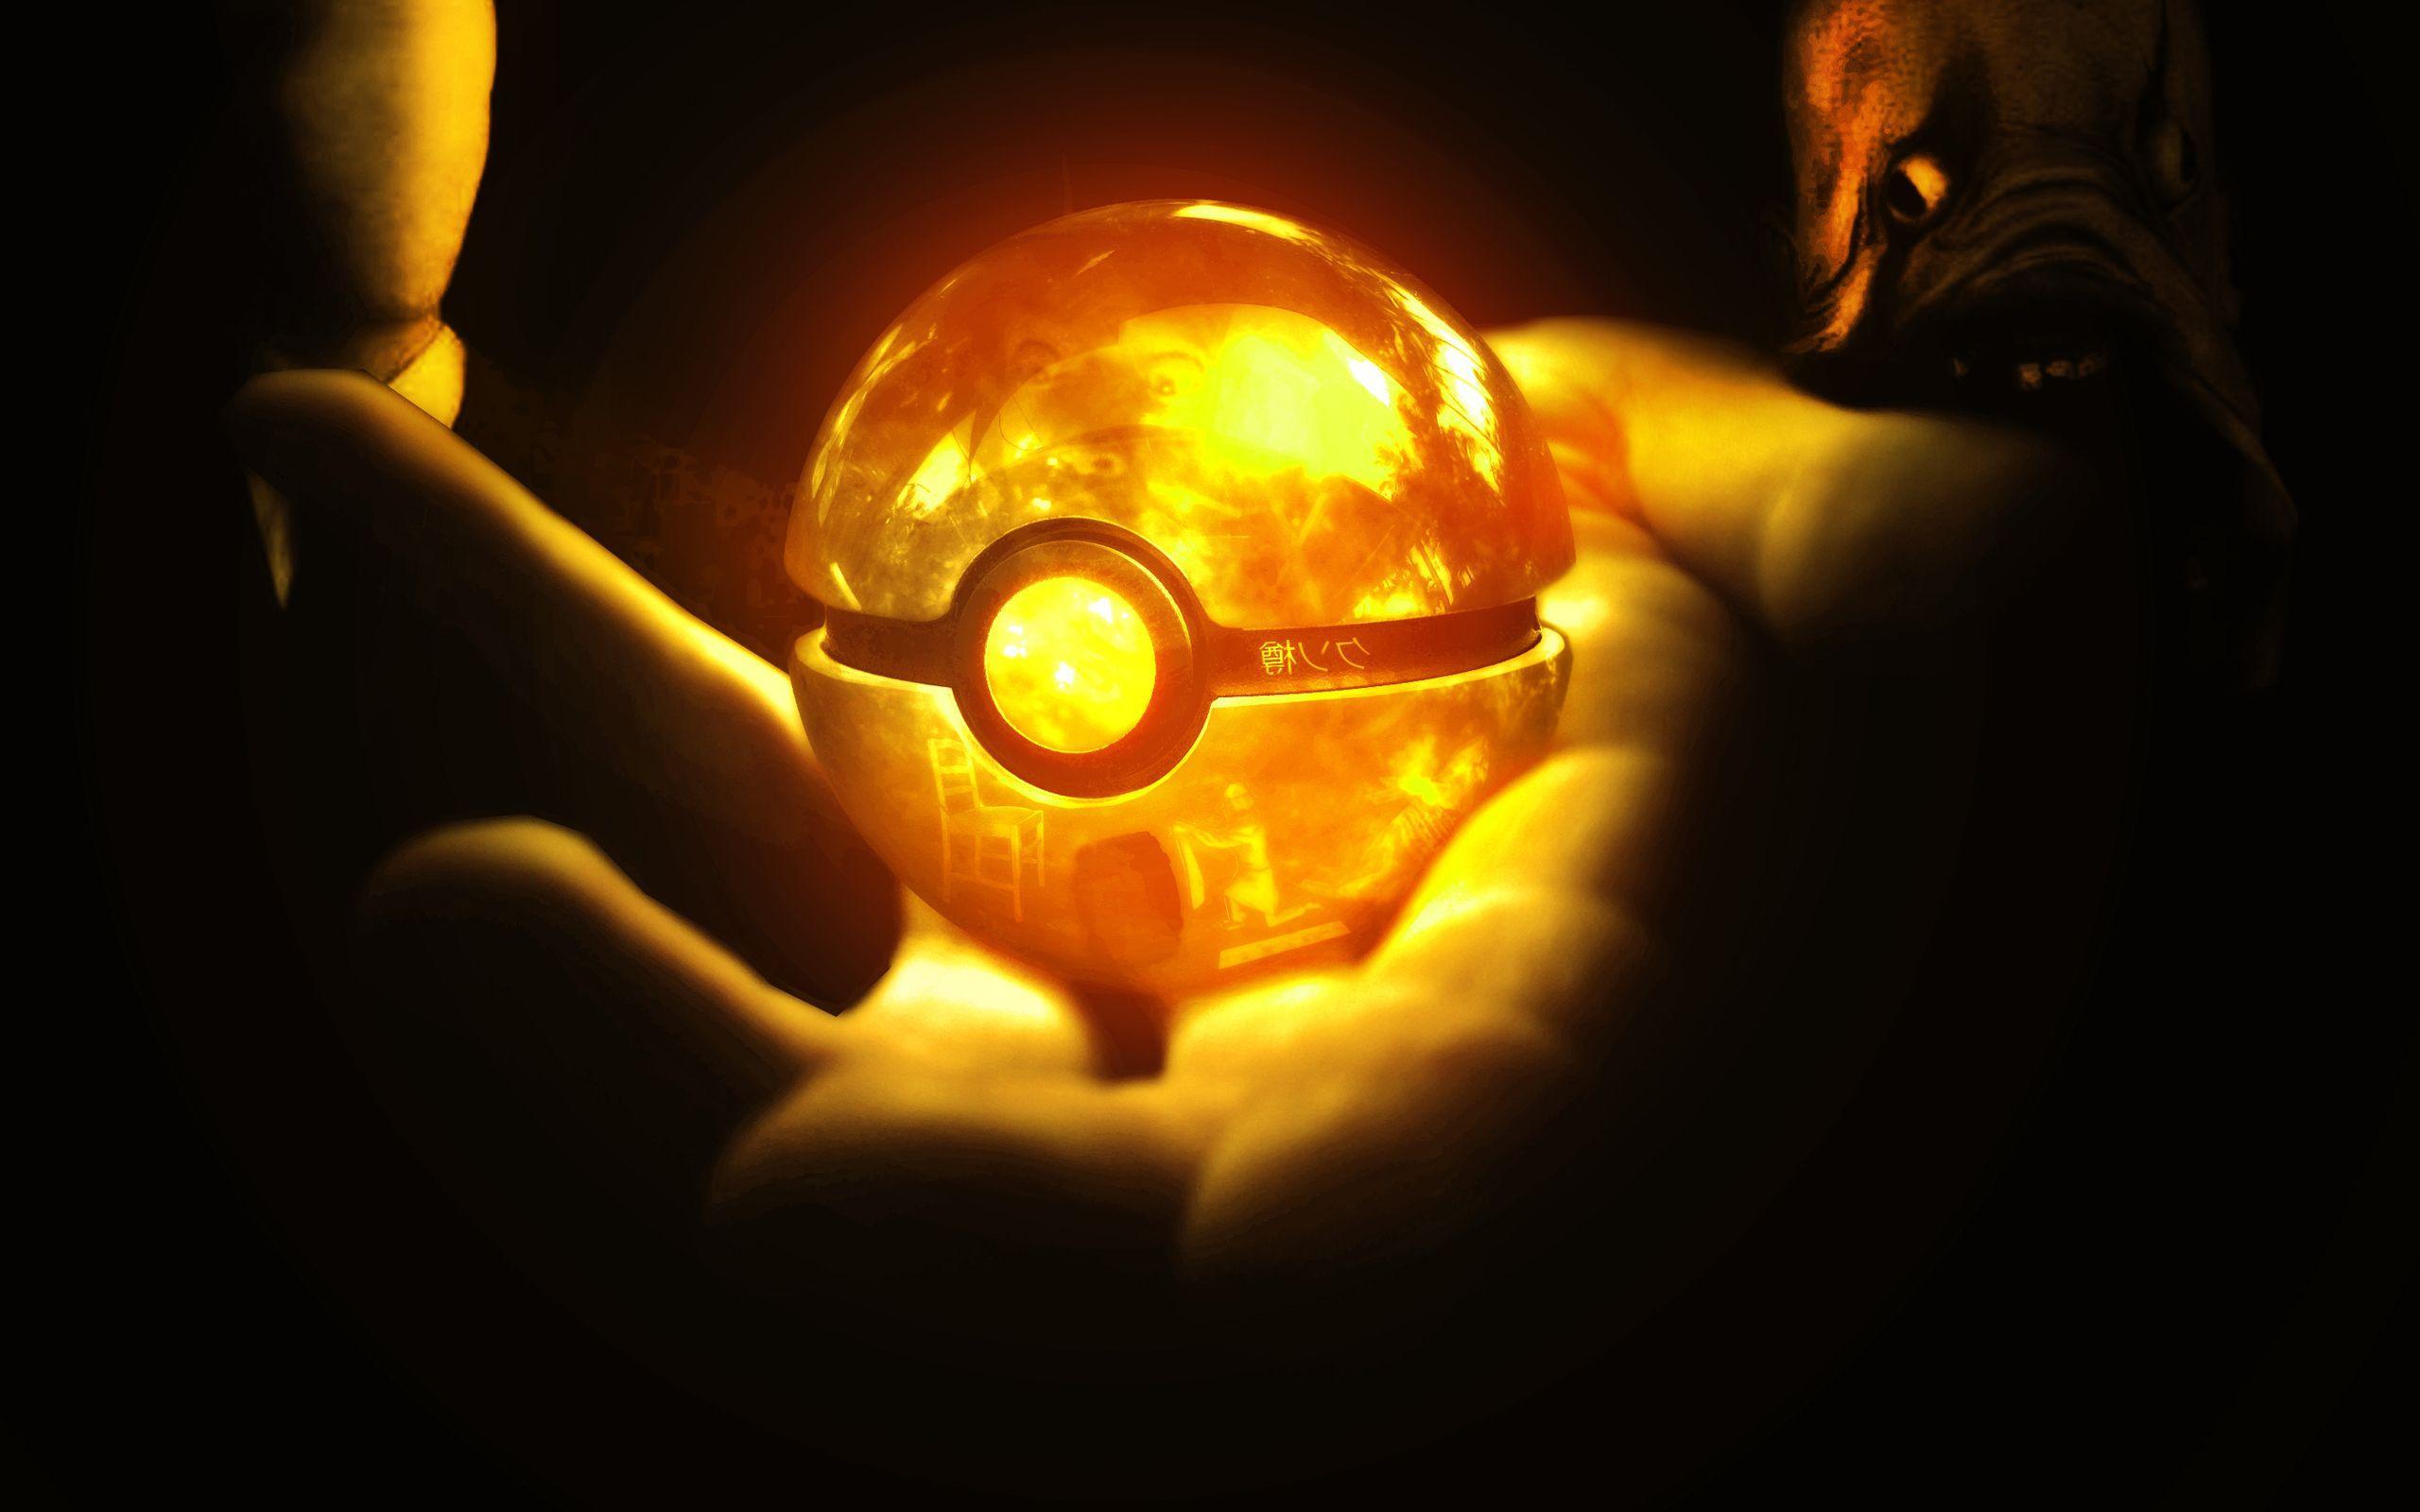 Download Pokemon GO Wallpaper, Picture and Image in Full HD